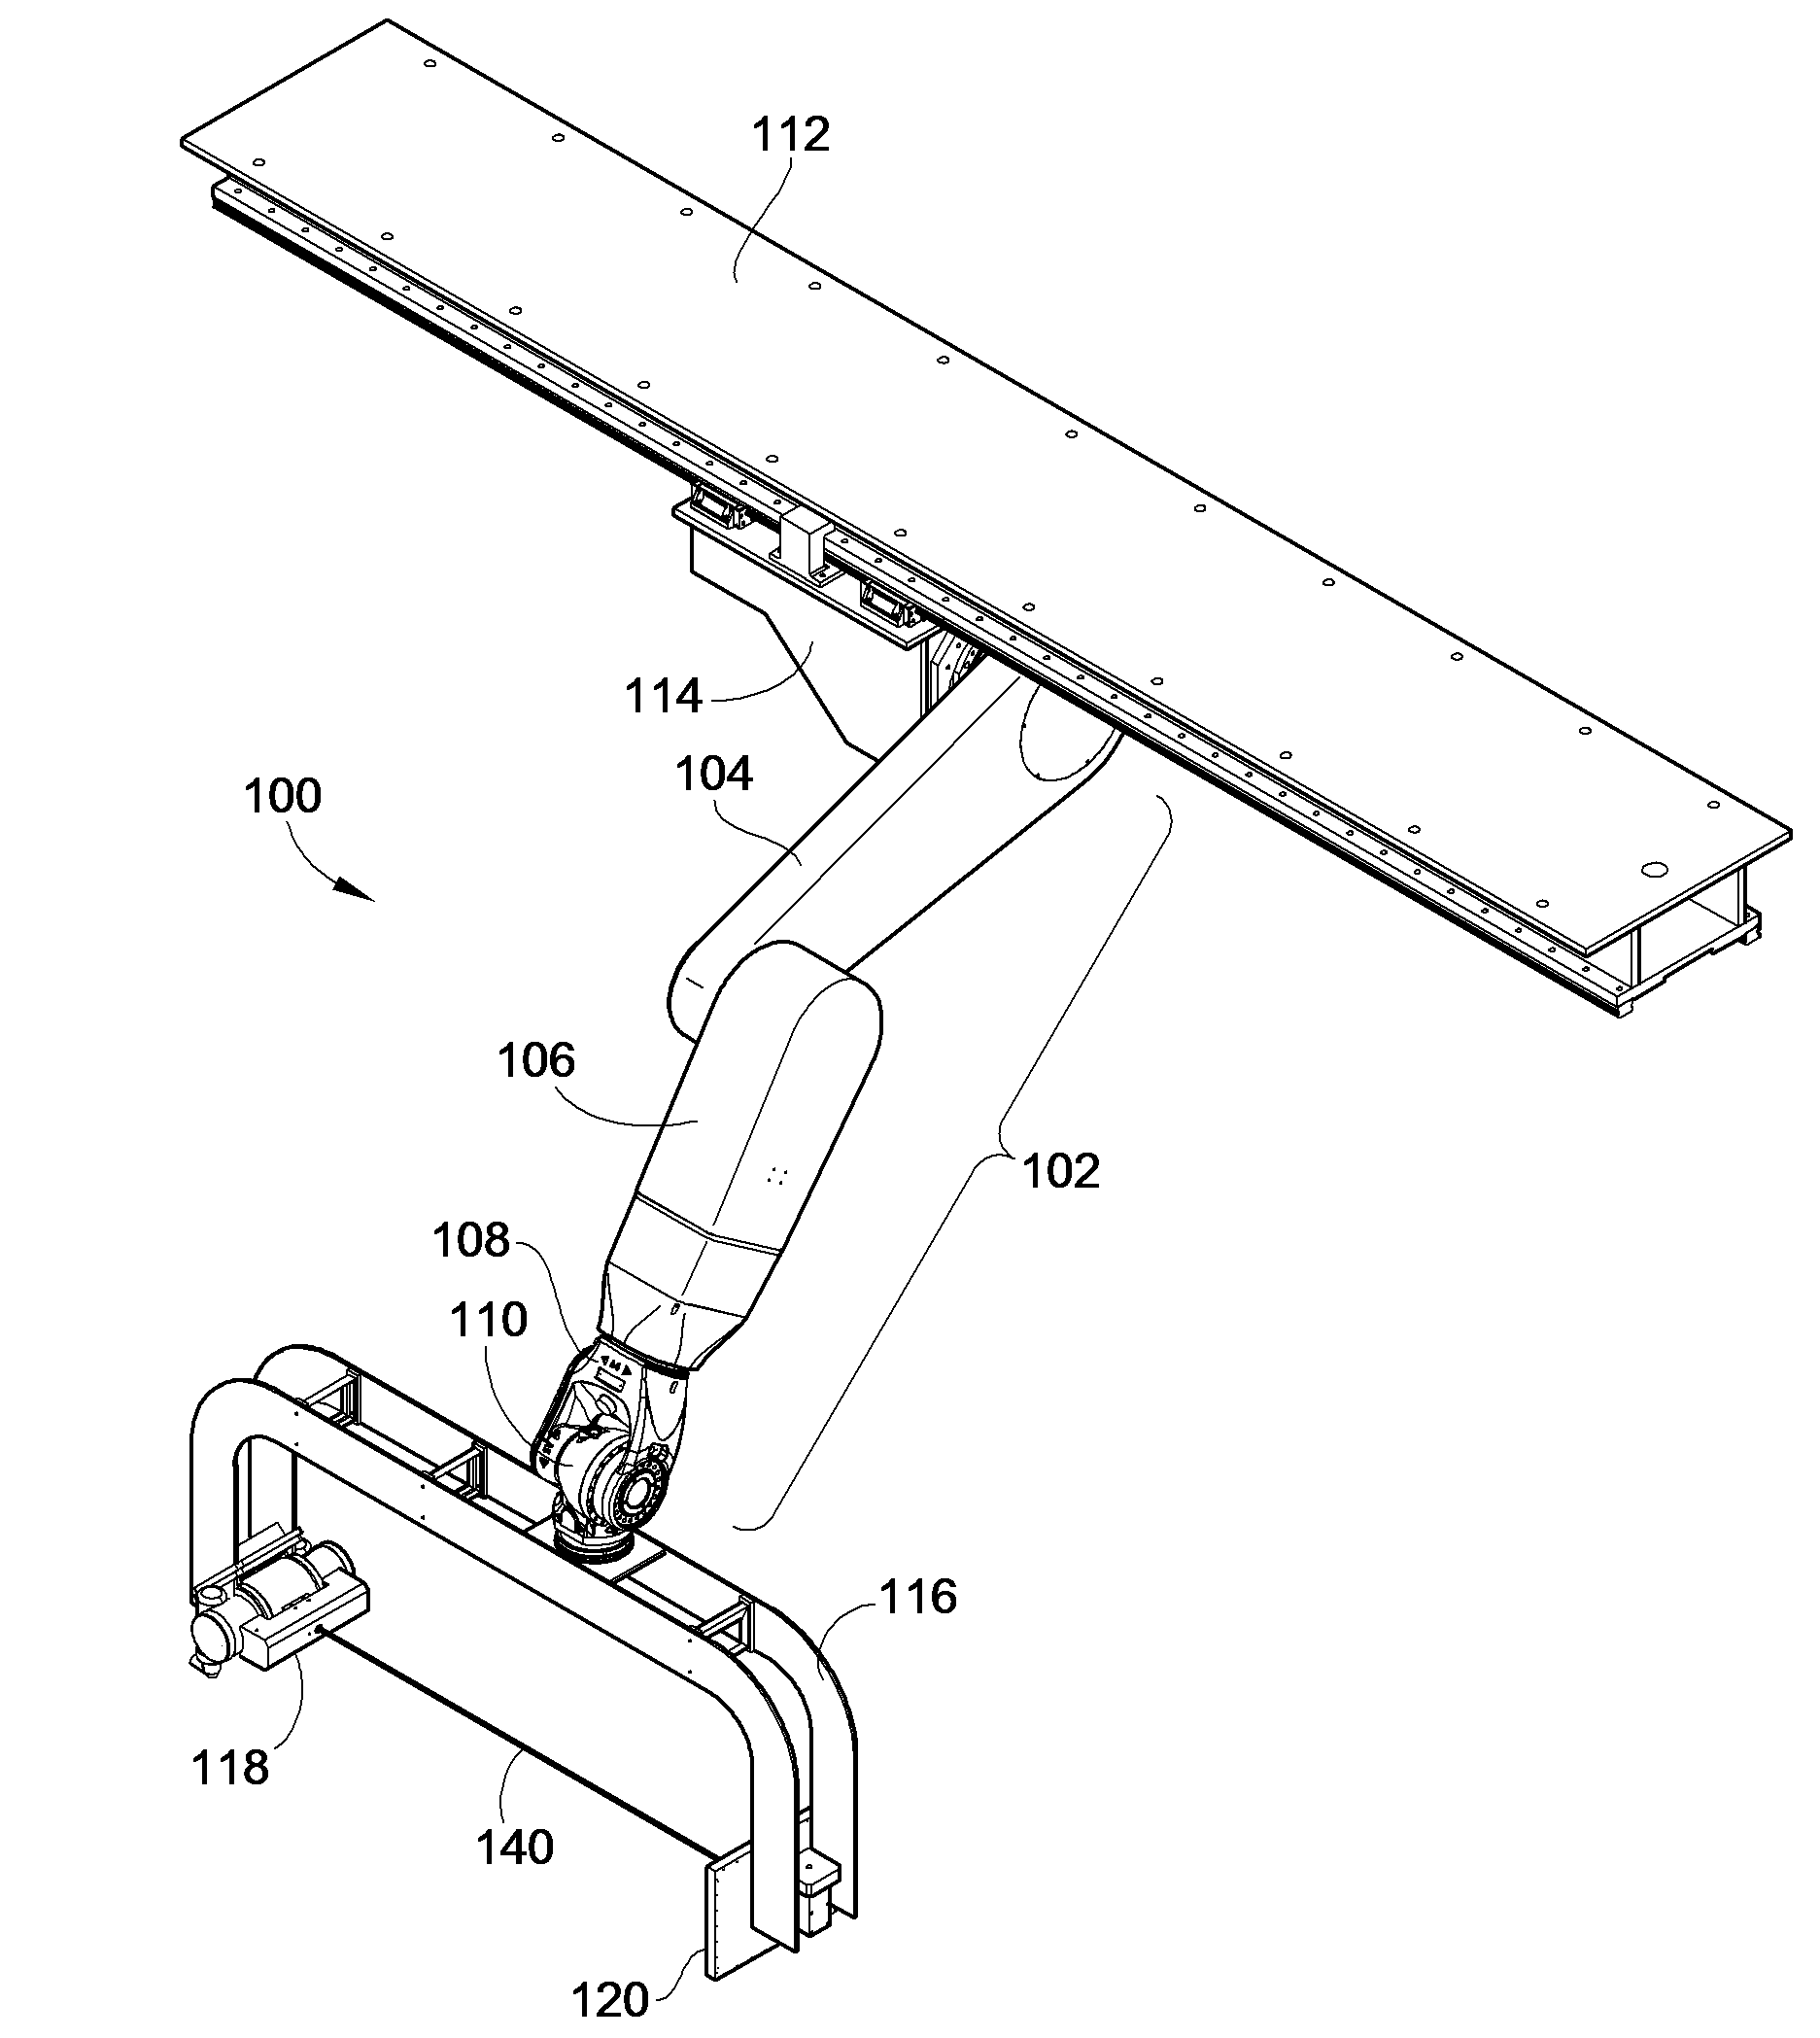 Imaging Positioning System Having Robotically Positioned D-Arm